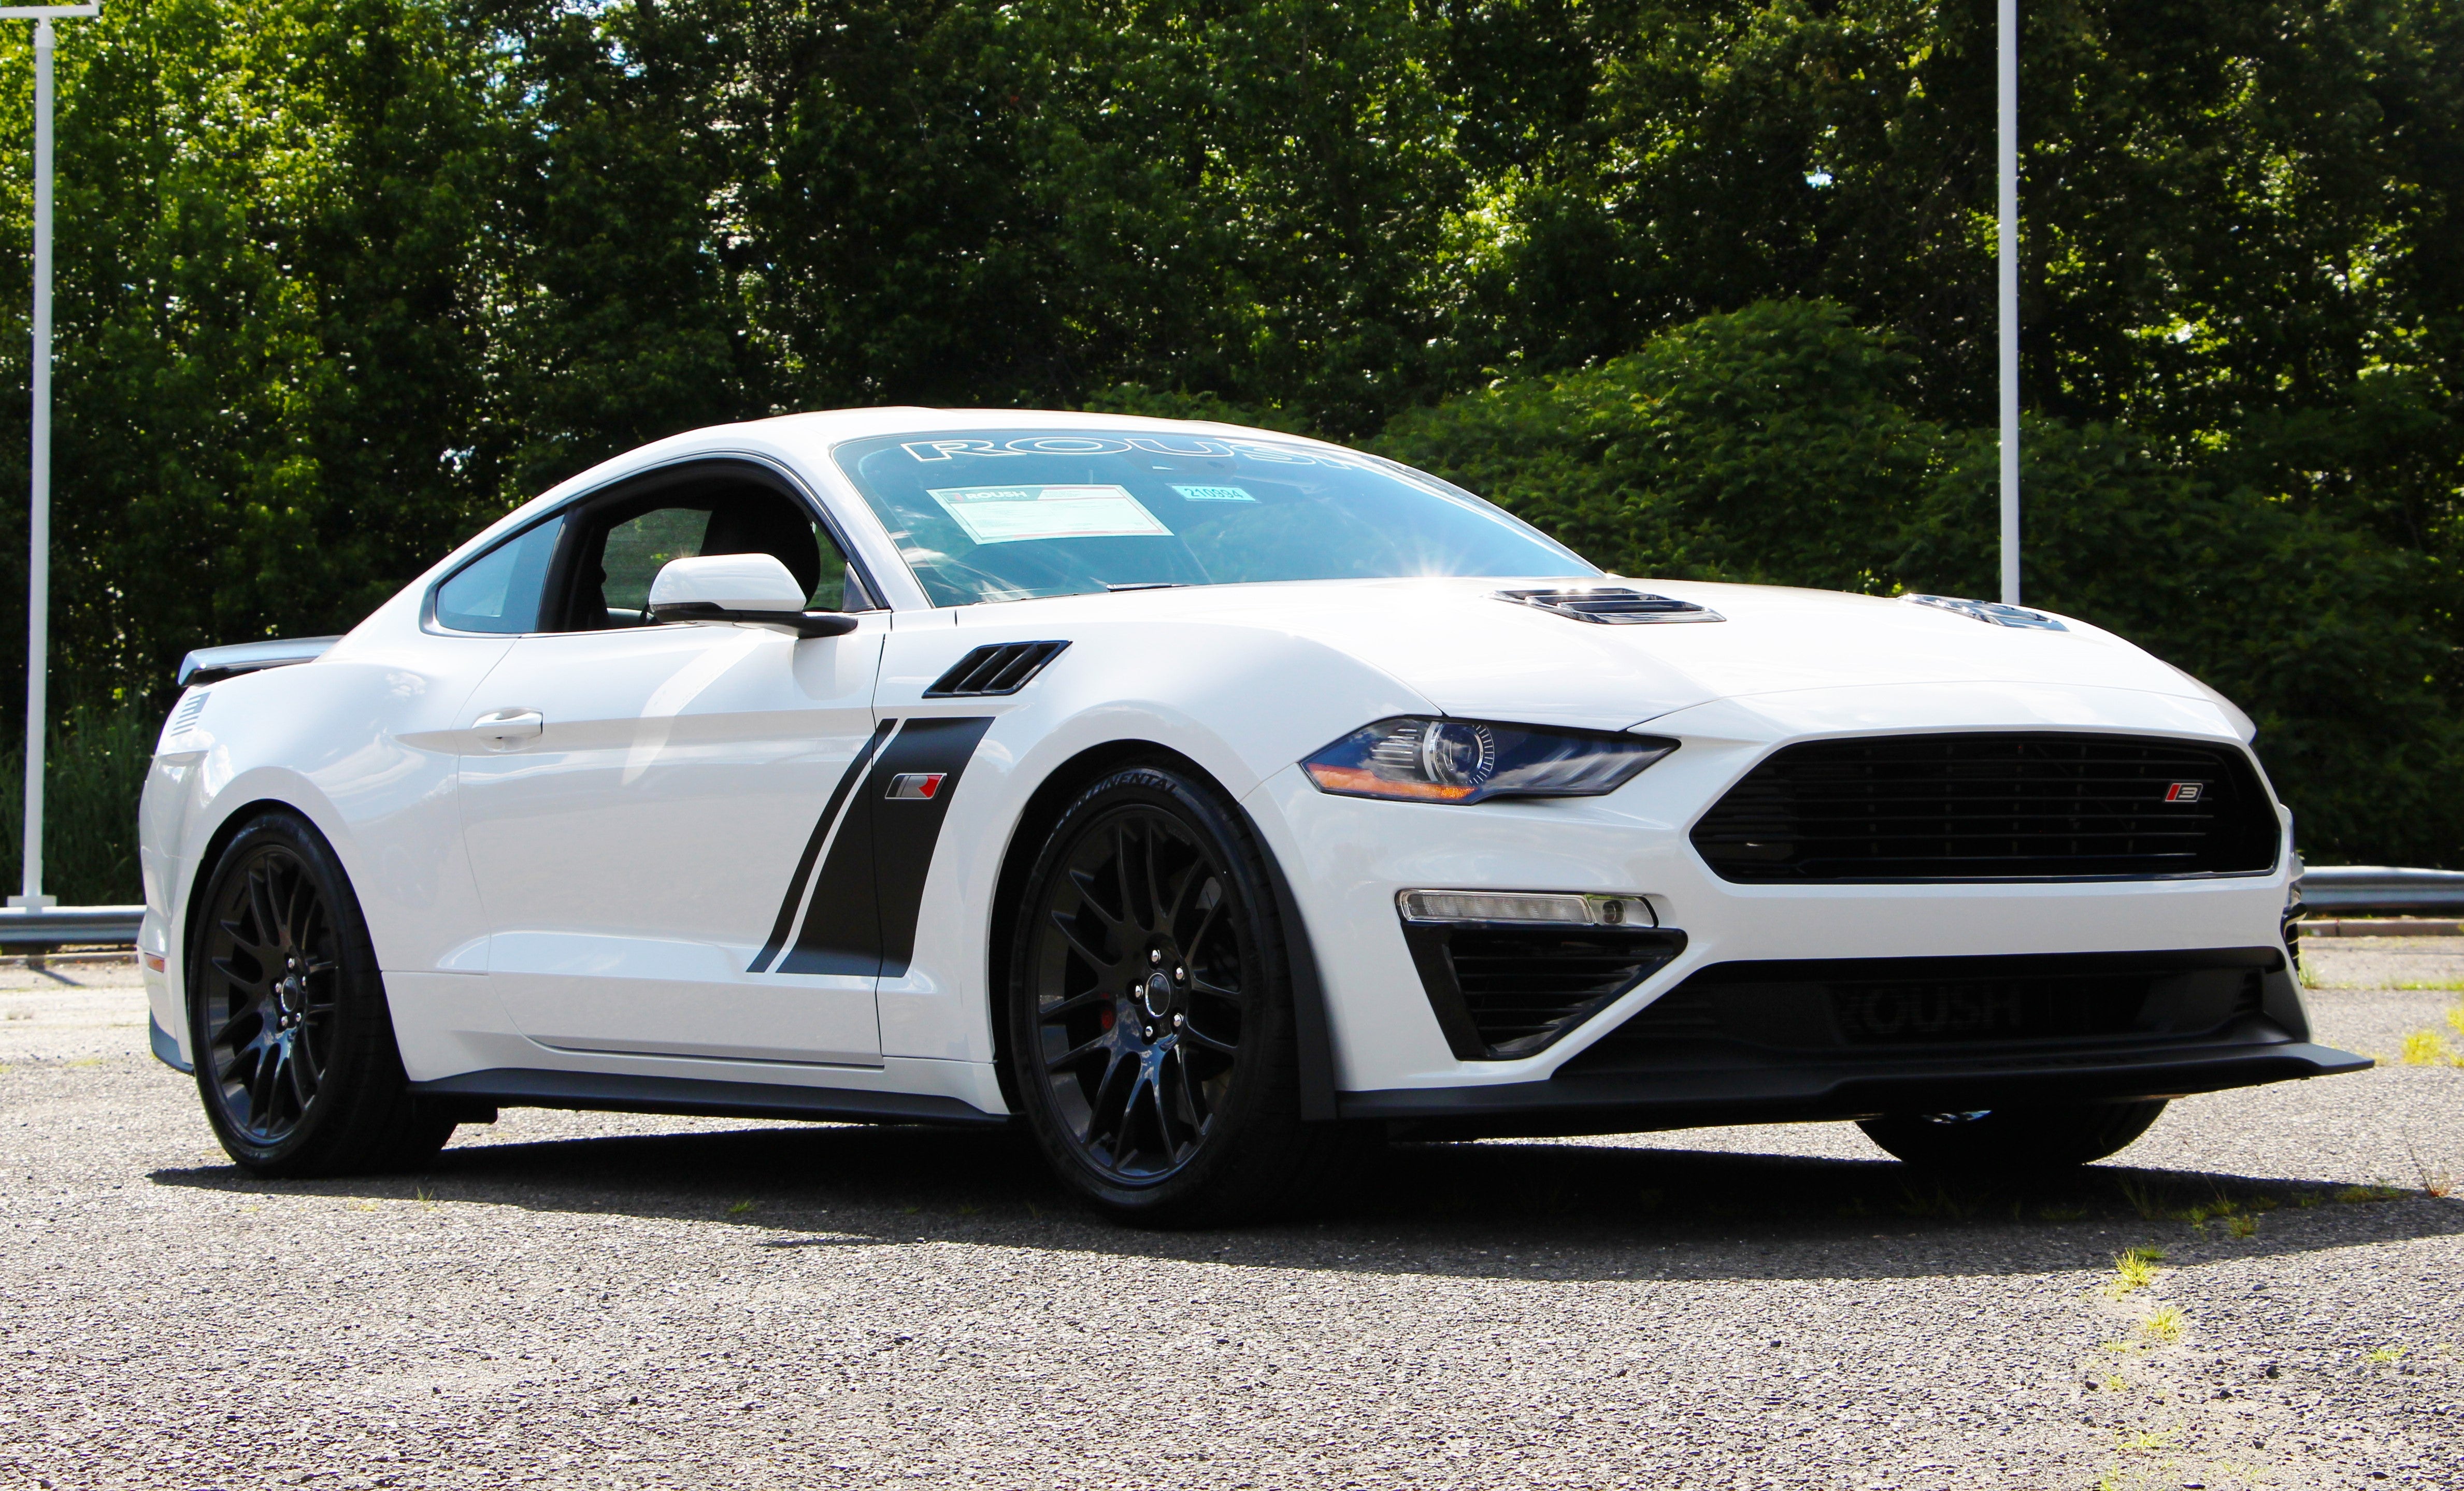 ROUSH Mustang White at All American Ford of Hackensack in Hackensack NJ